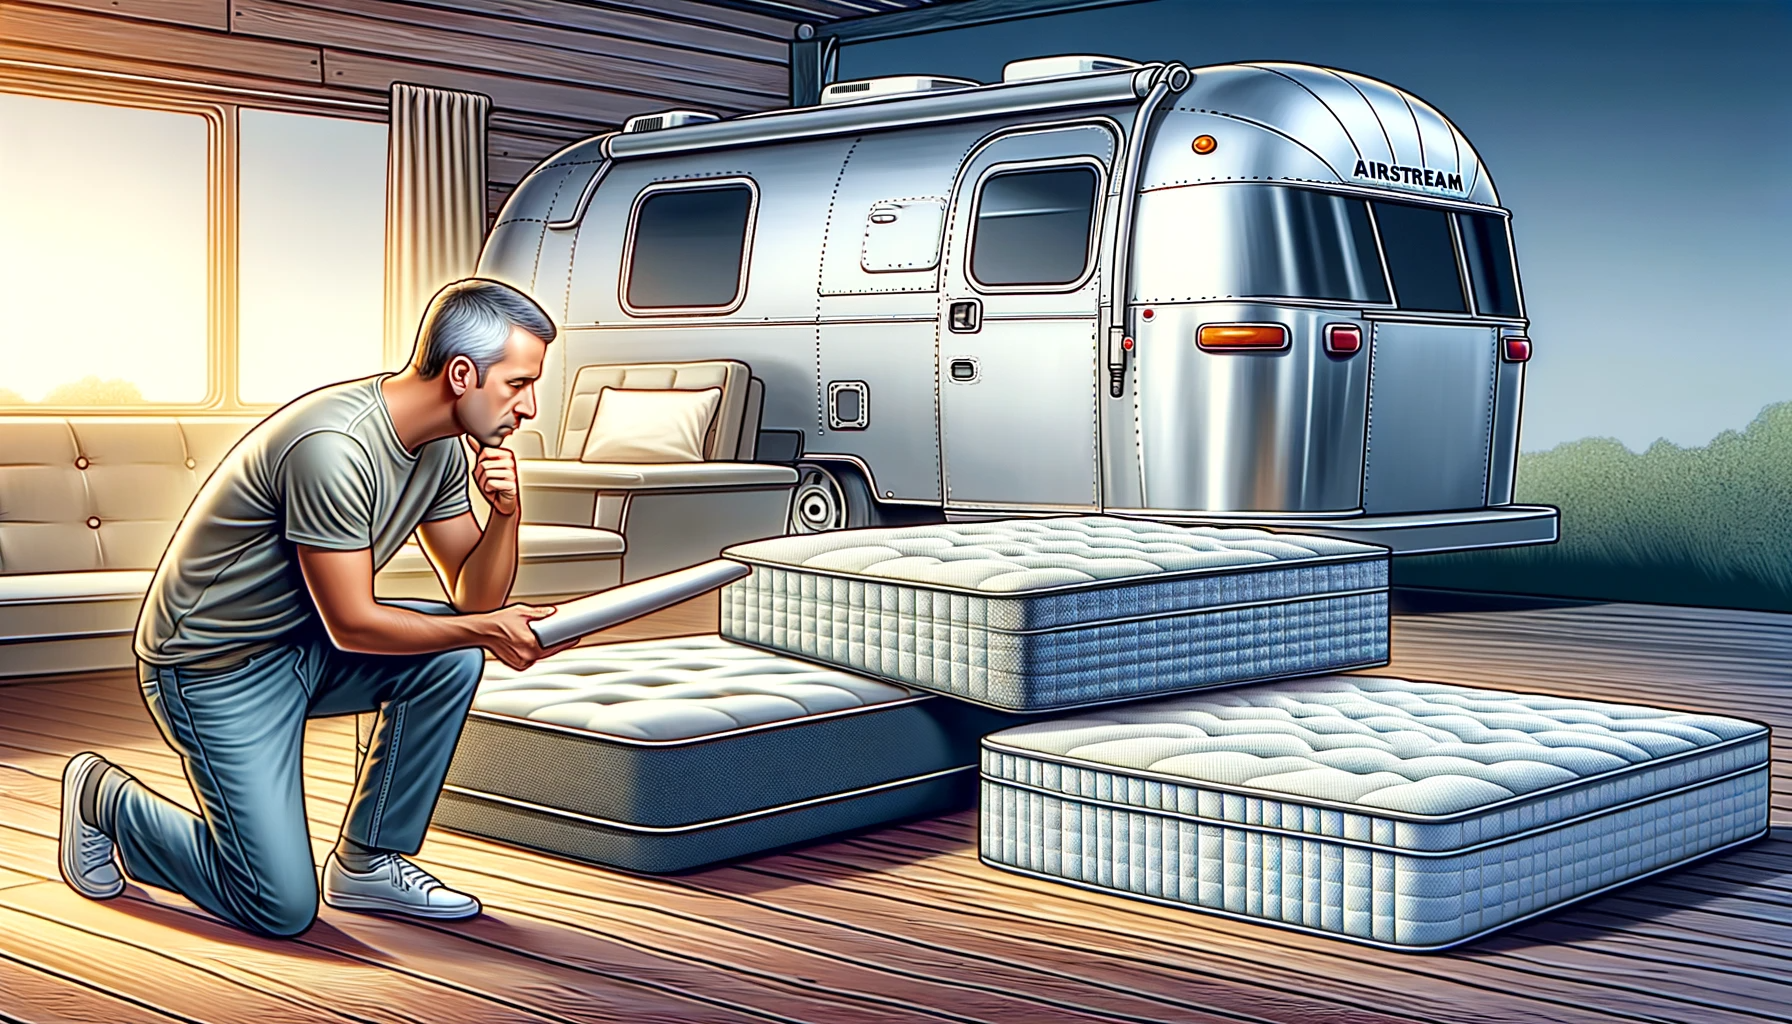 A middle-aged man thoughtfully examining various mattresses, focusing on comfort, size, and material suitability for an Airstream caravan, symbolizing the detailed decision-making process for enhancing travel comfort in a caravan environment.